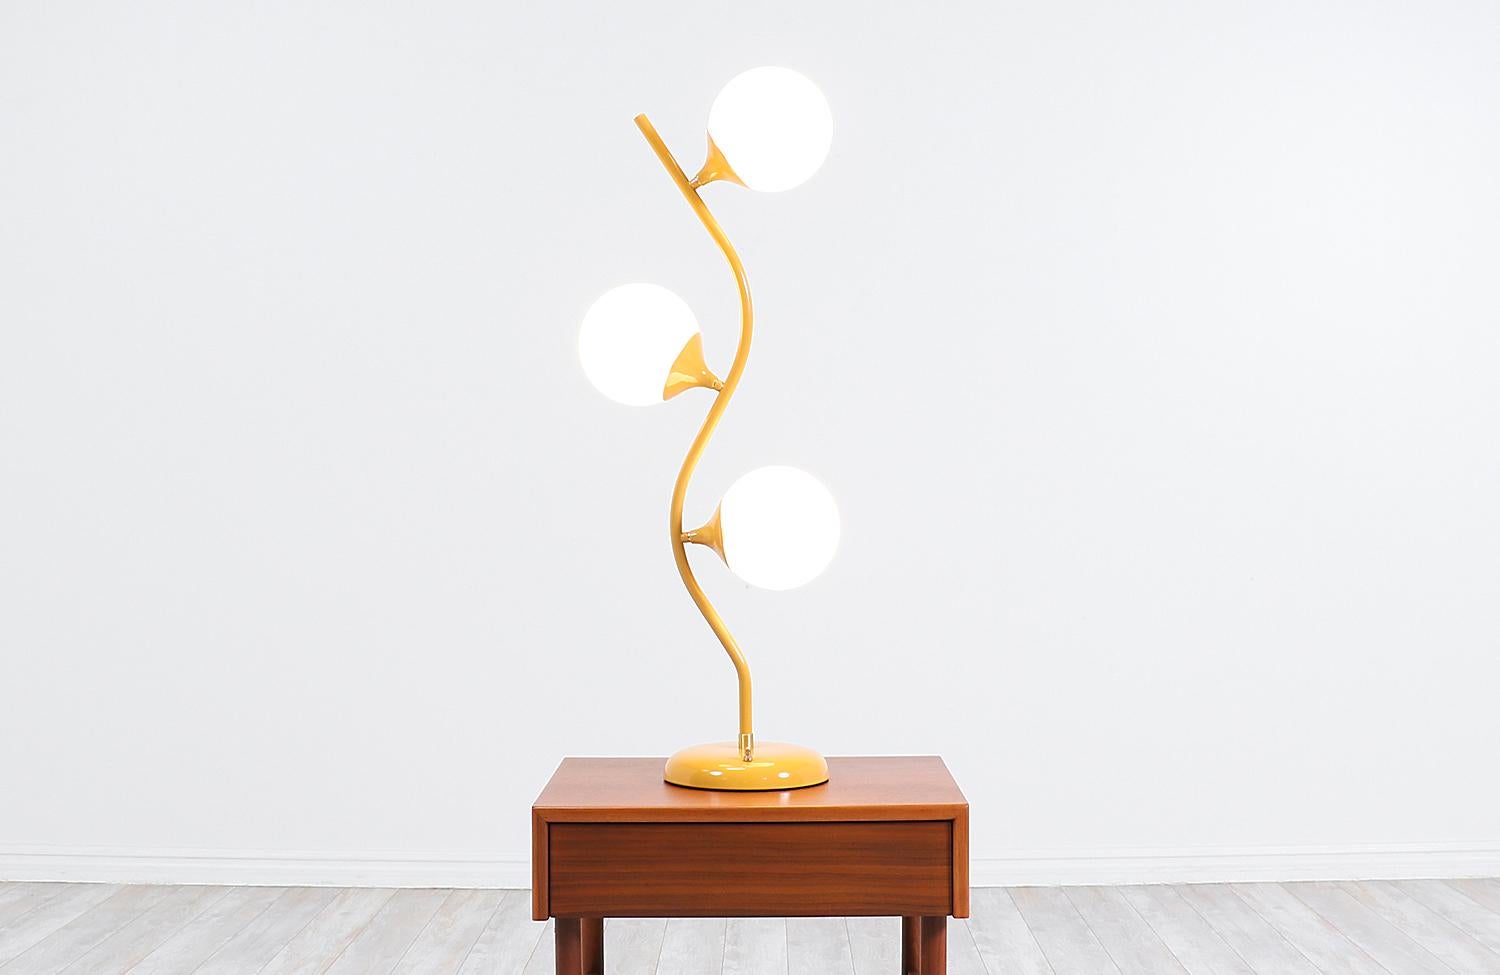 Vintage modern table lamp designed and made in the United States, circa 1960s. Our unique lamp features a mustard lacquered tulip base and stem that holds its glass globes that light up individually or together at the same time. Its organic and